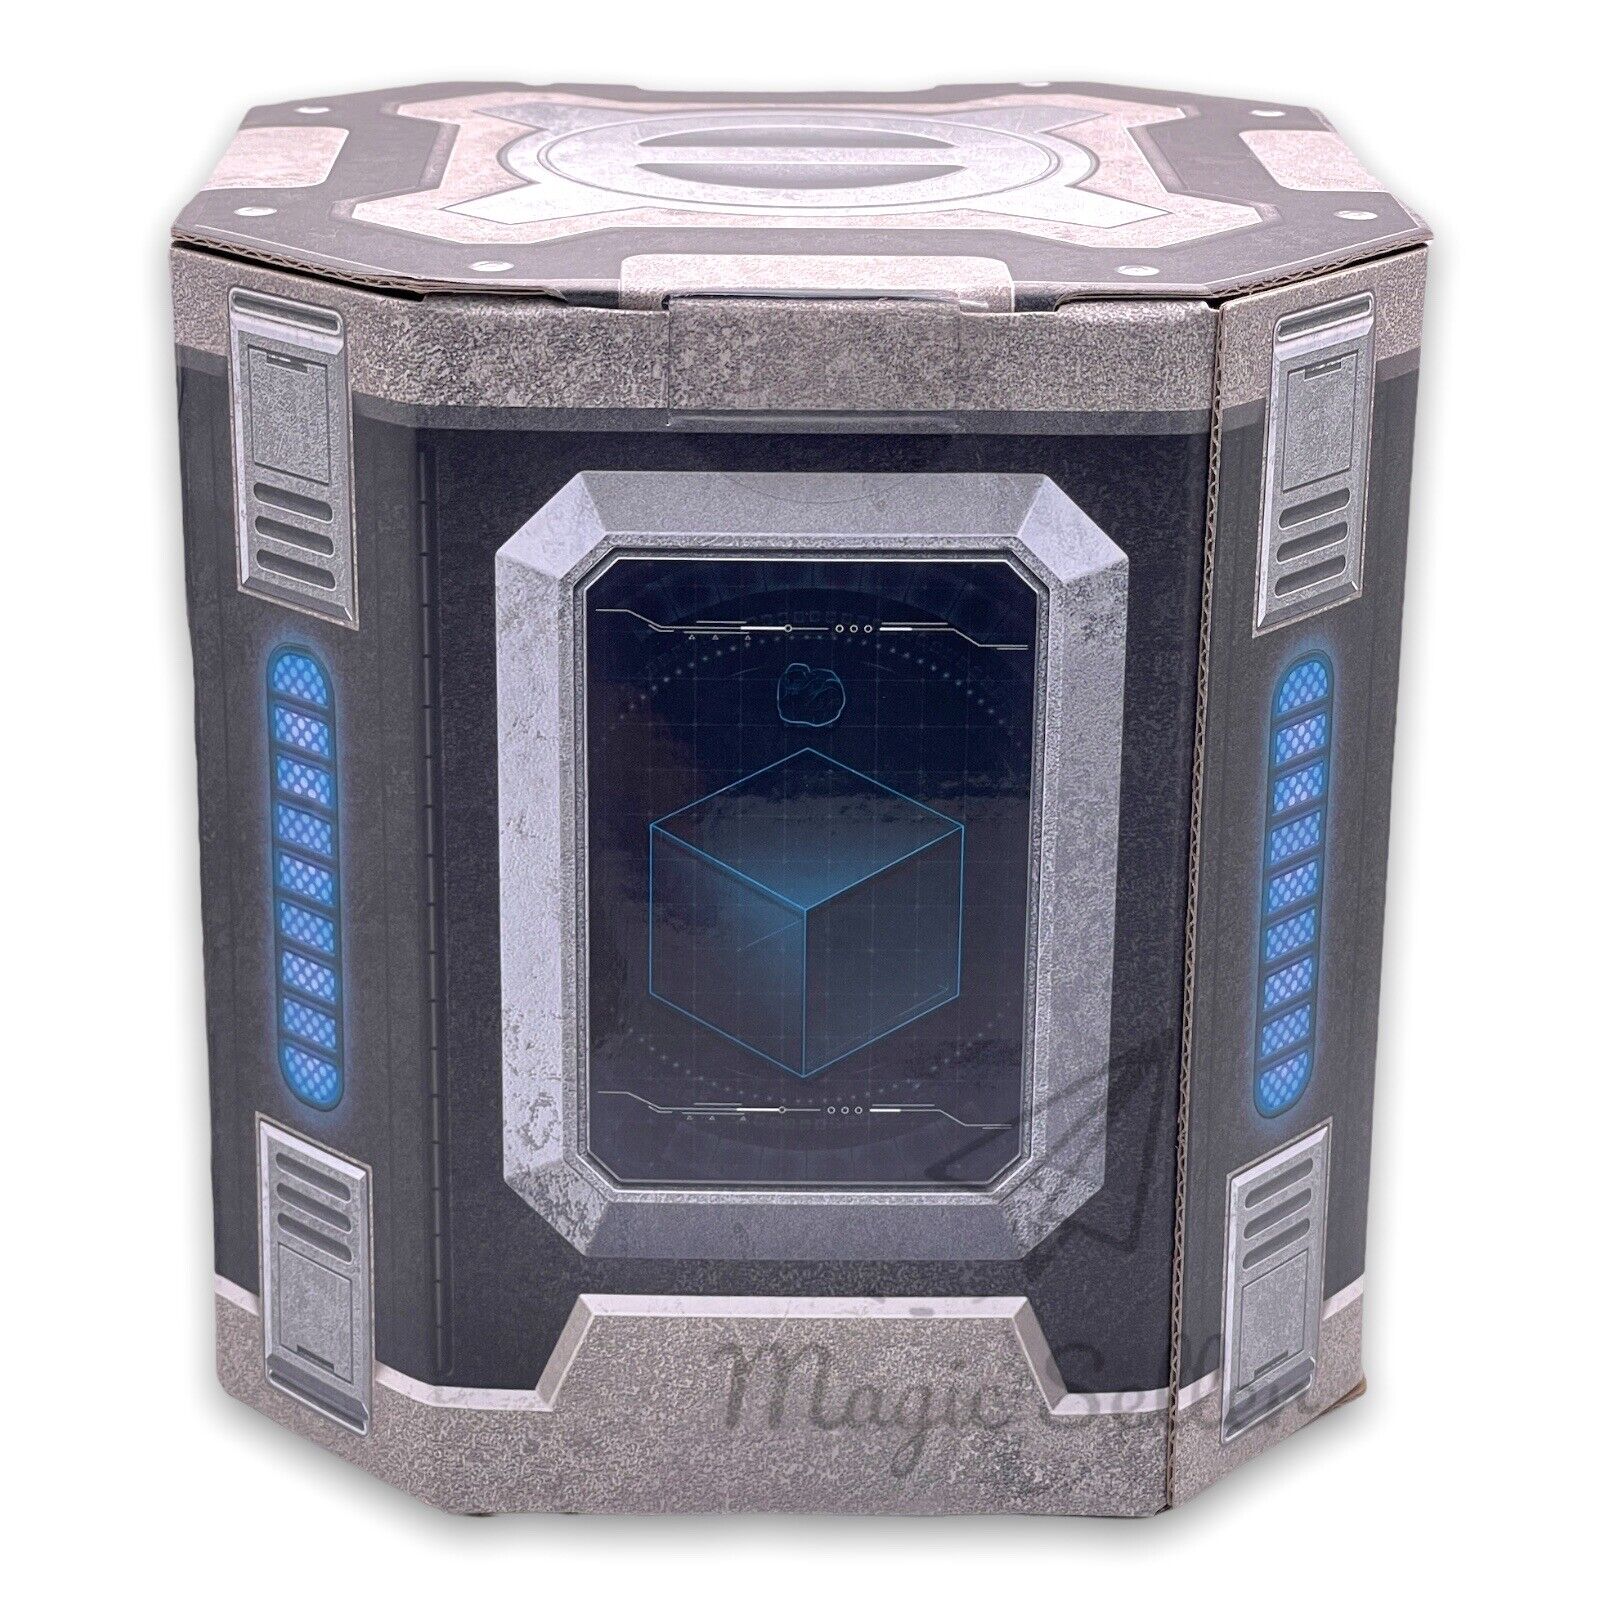 2022 Disney Parks Epcot Guardians Of The Galaxy Cosmic Rewind Tesseract Cube